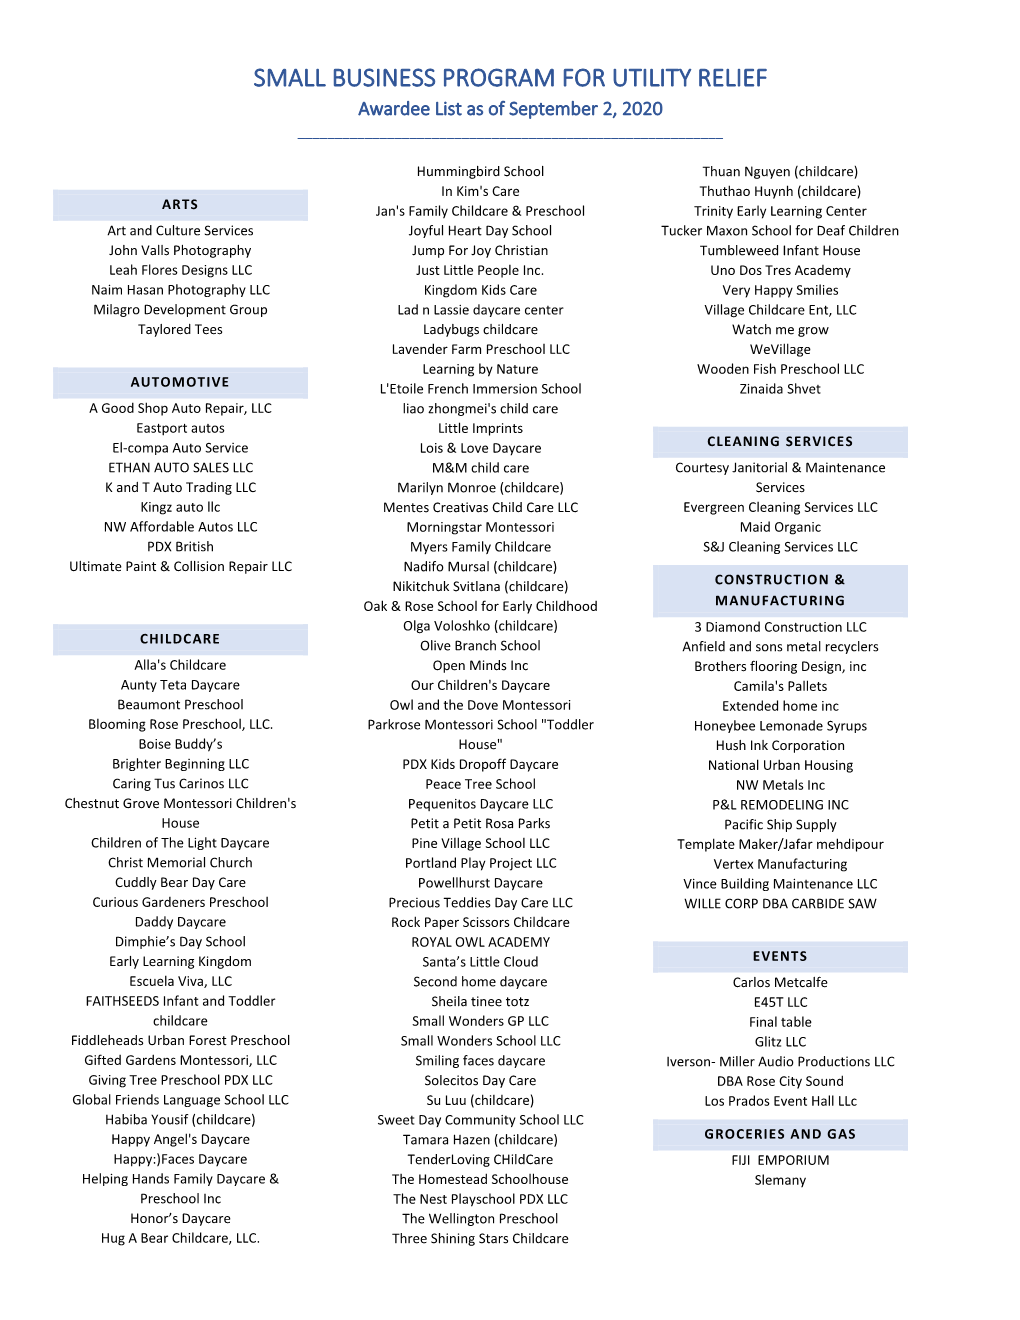 SMALL BUSINESS PROGRAM for UTILITY RELIEF Awardee List As of September 2, 2020 ______